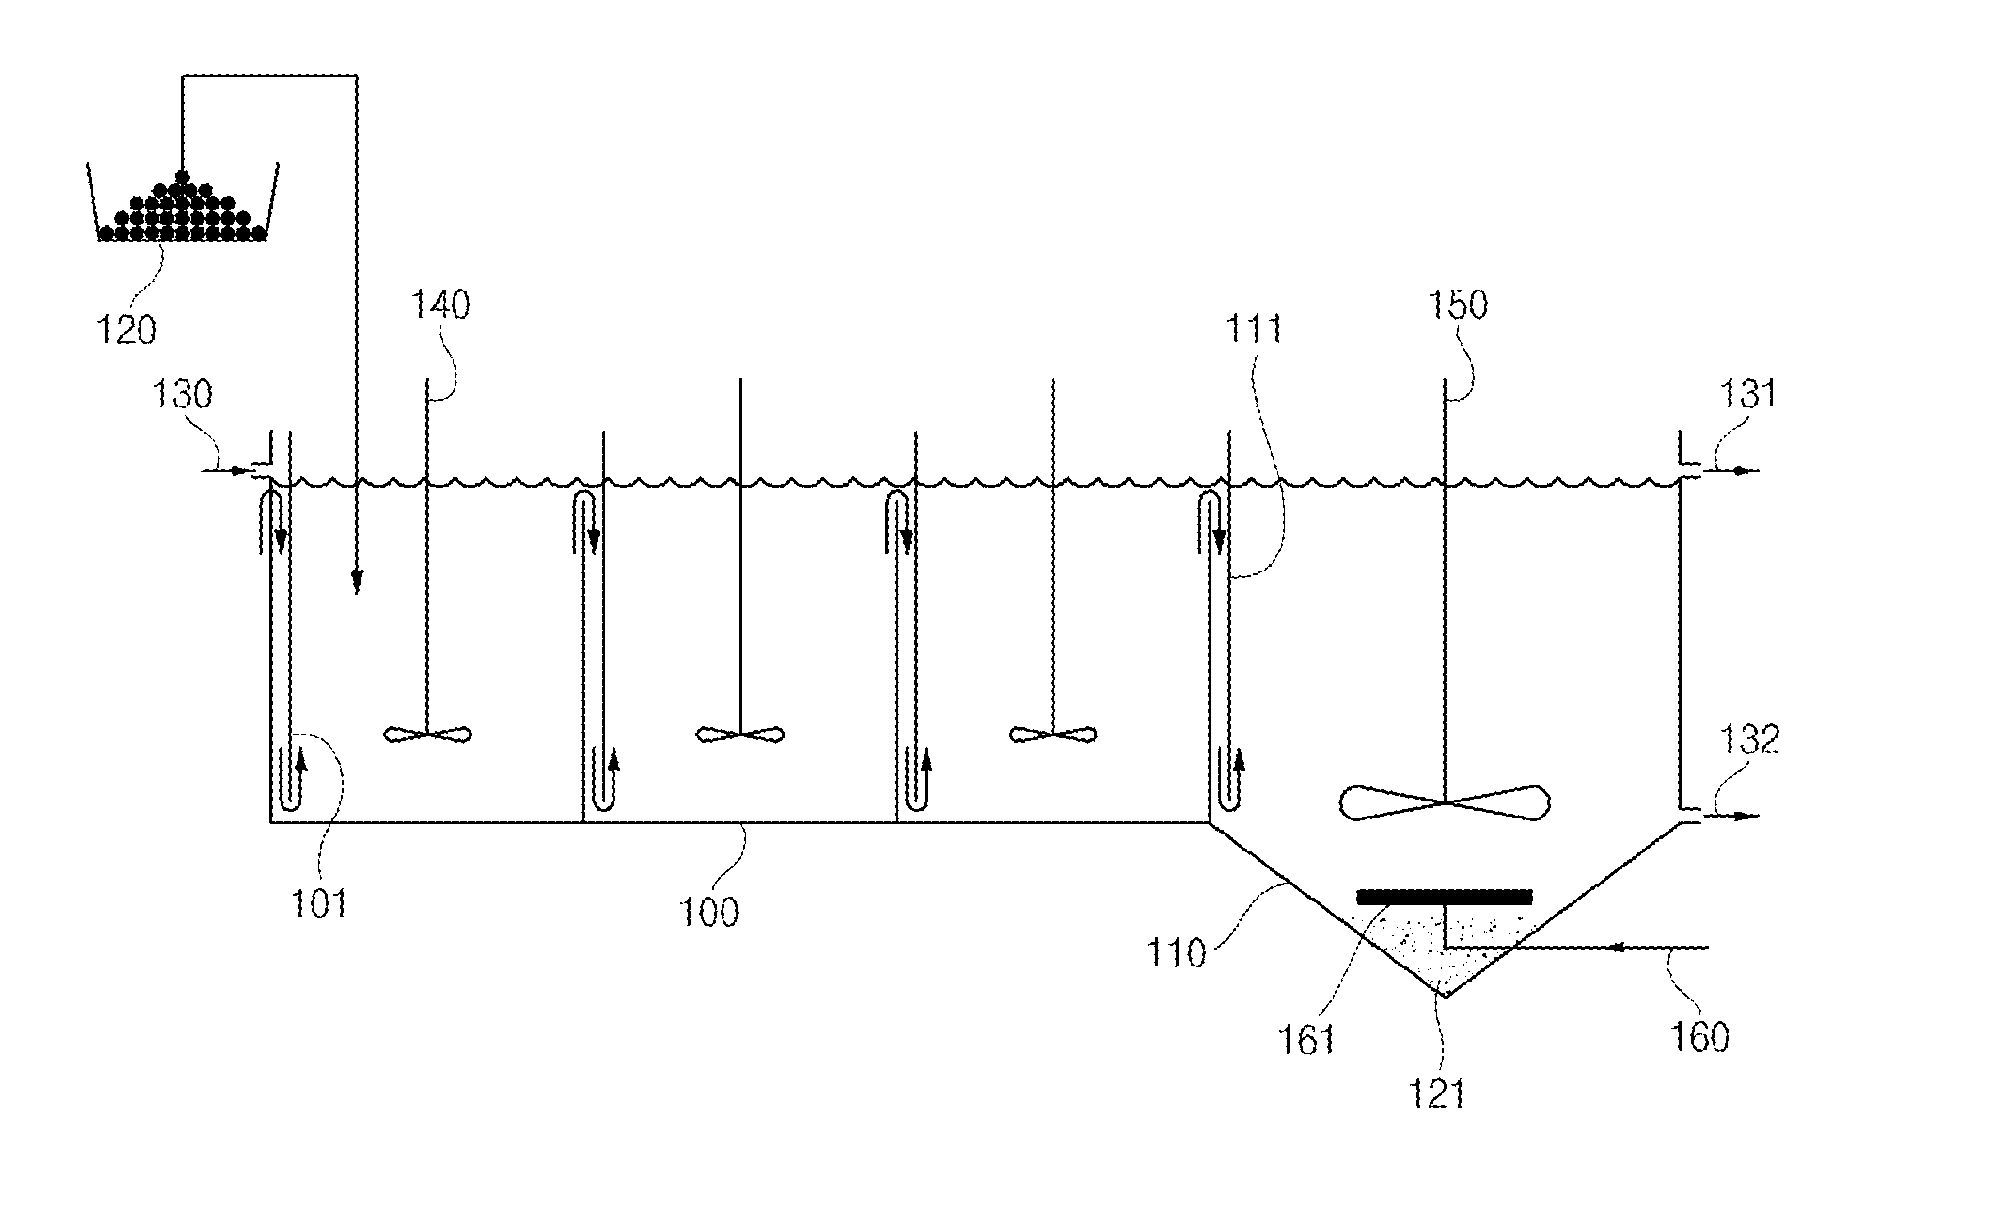 Apparatus for concentration reaction of carbon dioxide using magnesium ions in seawater, and method for sequestrating carbon dioxide in ocean using same